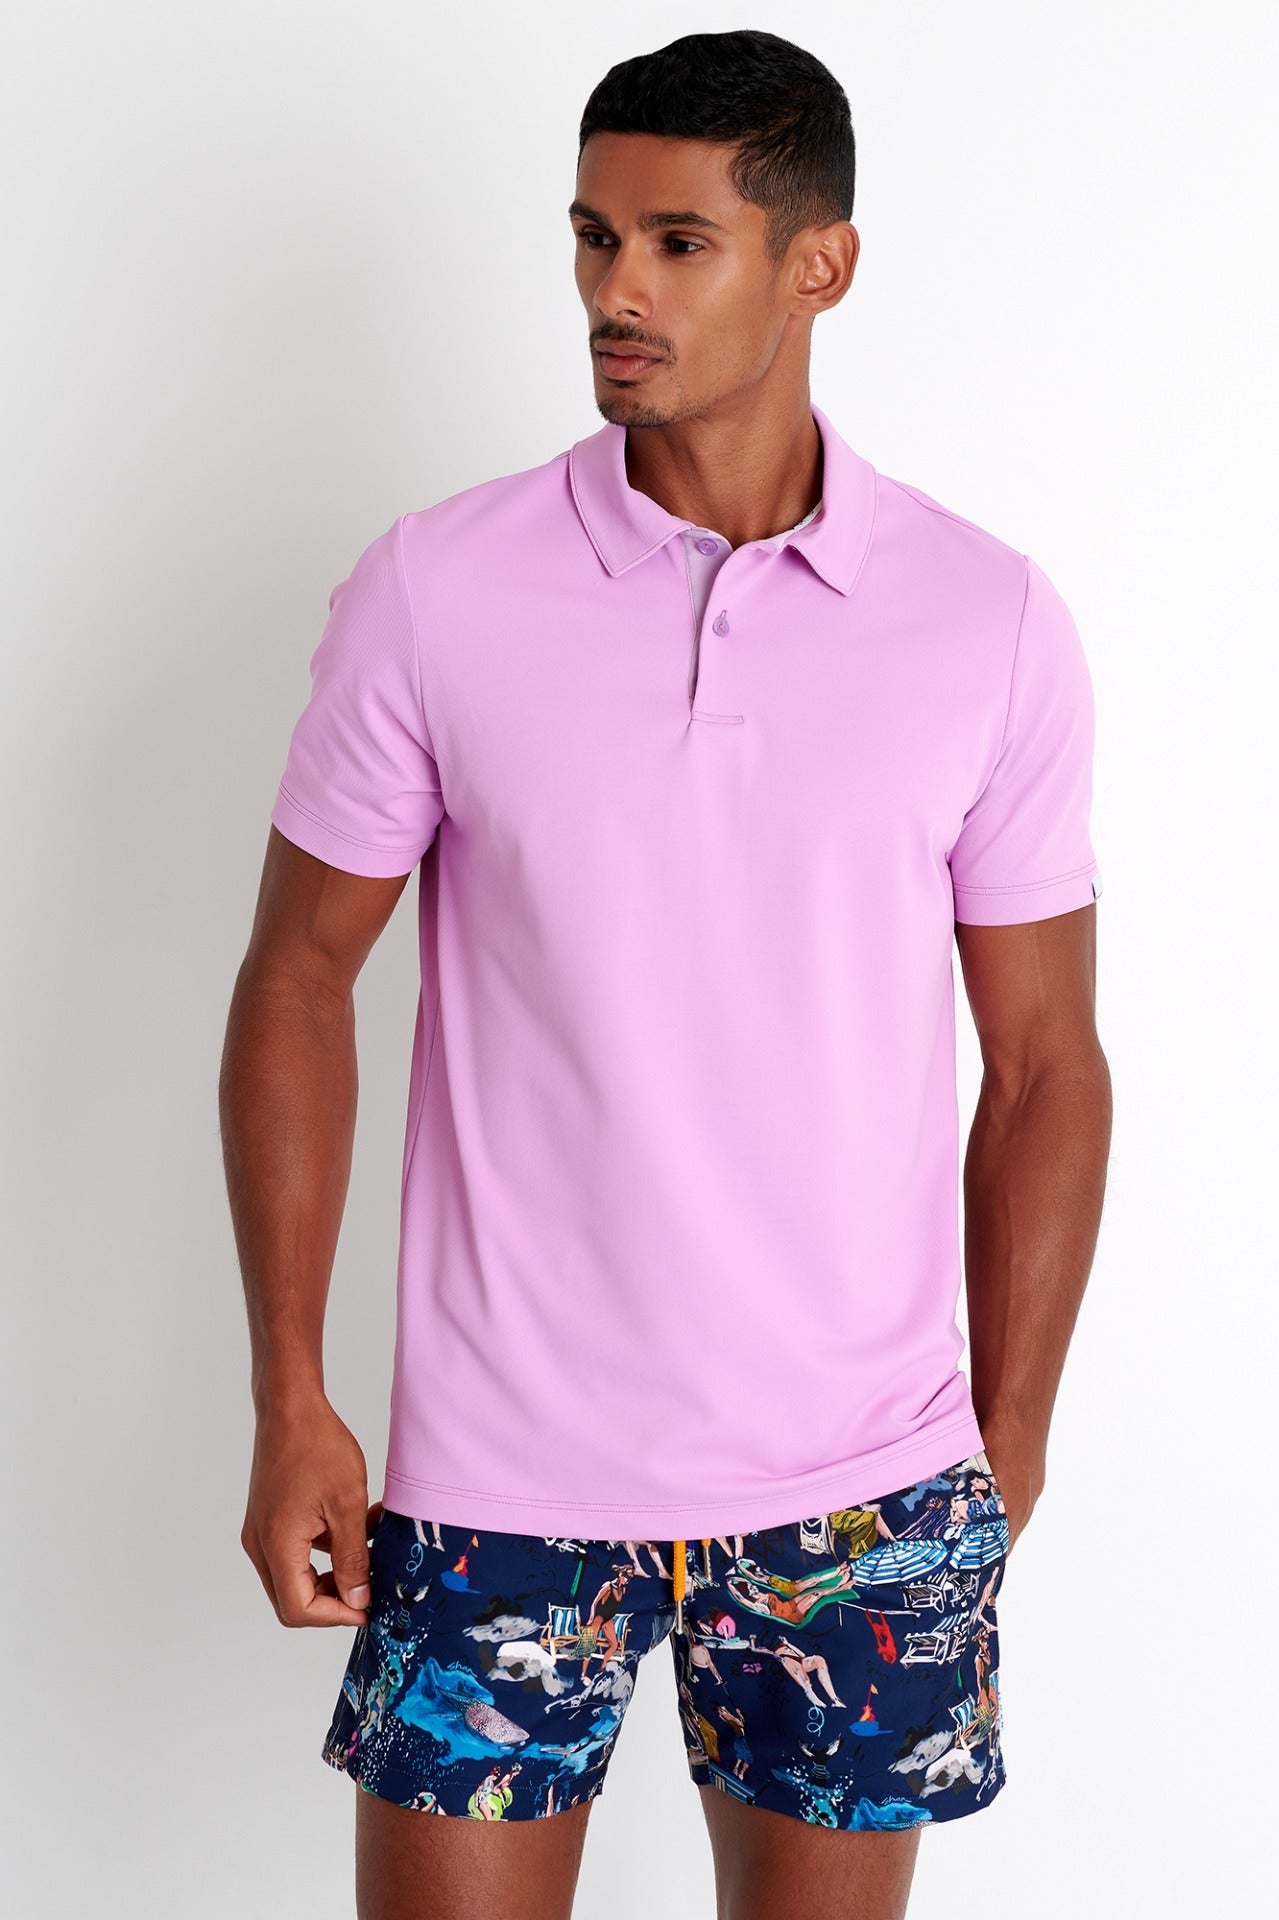 Textured Jersey Polo - 62213-47-200